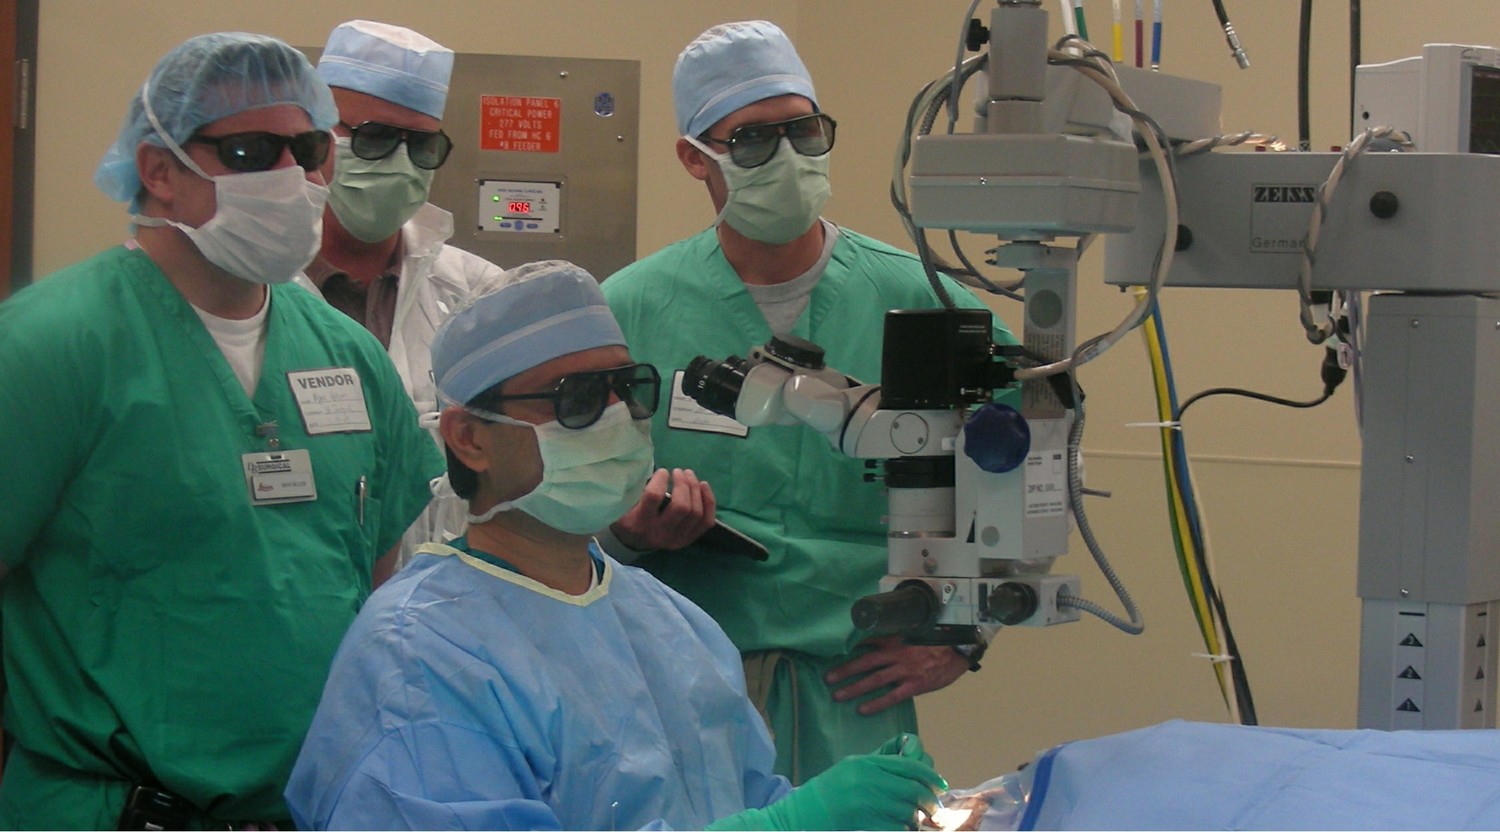 Dr. Arun Gulani and his team perform the world’s first 3D “No-Stitch” pterygium surgery on a local dental surgeon.